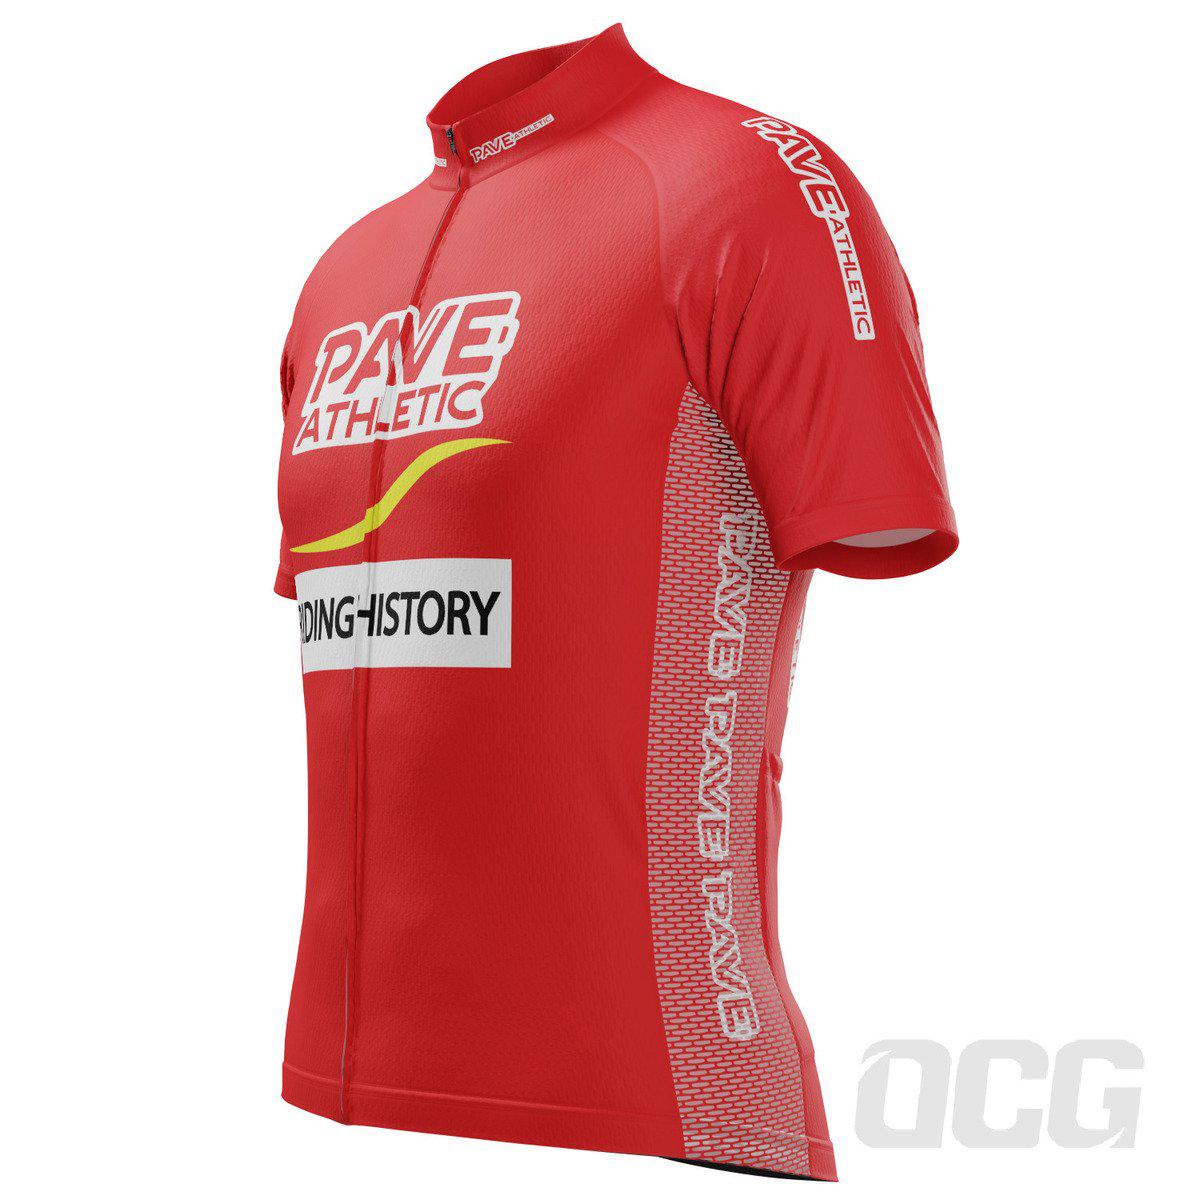 Men's PAVE Athletic Baker Short Sleeve Cycling Jersey